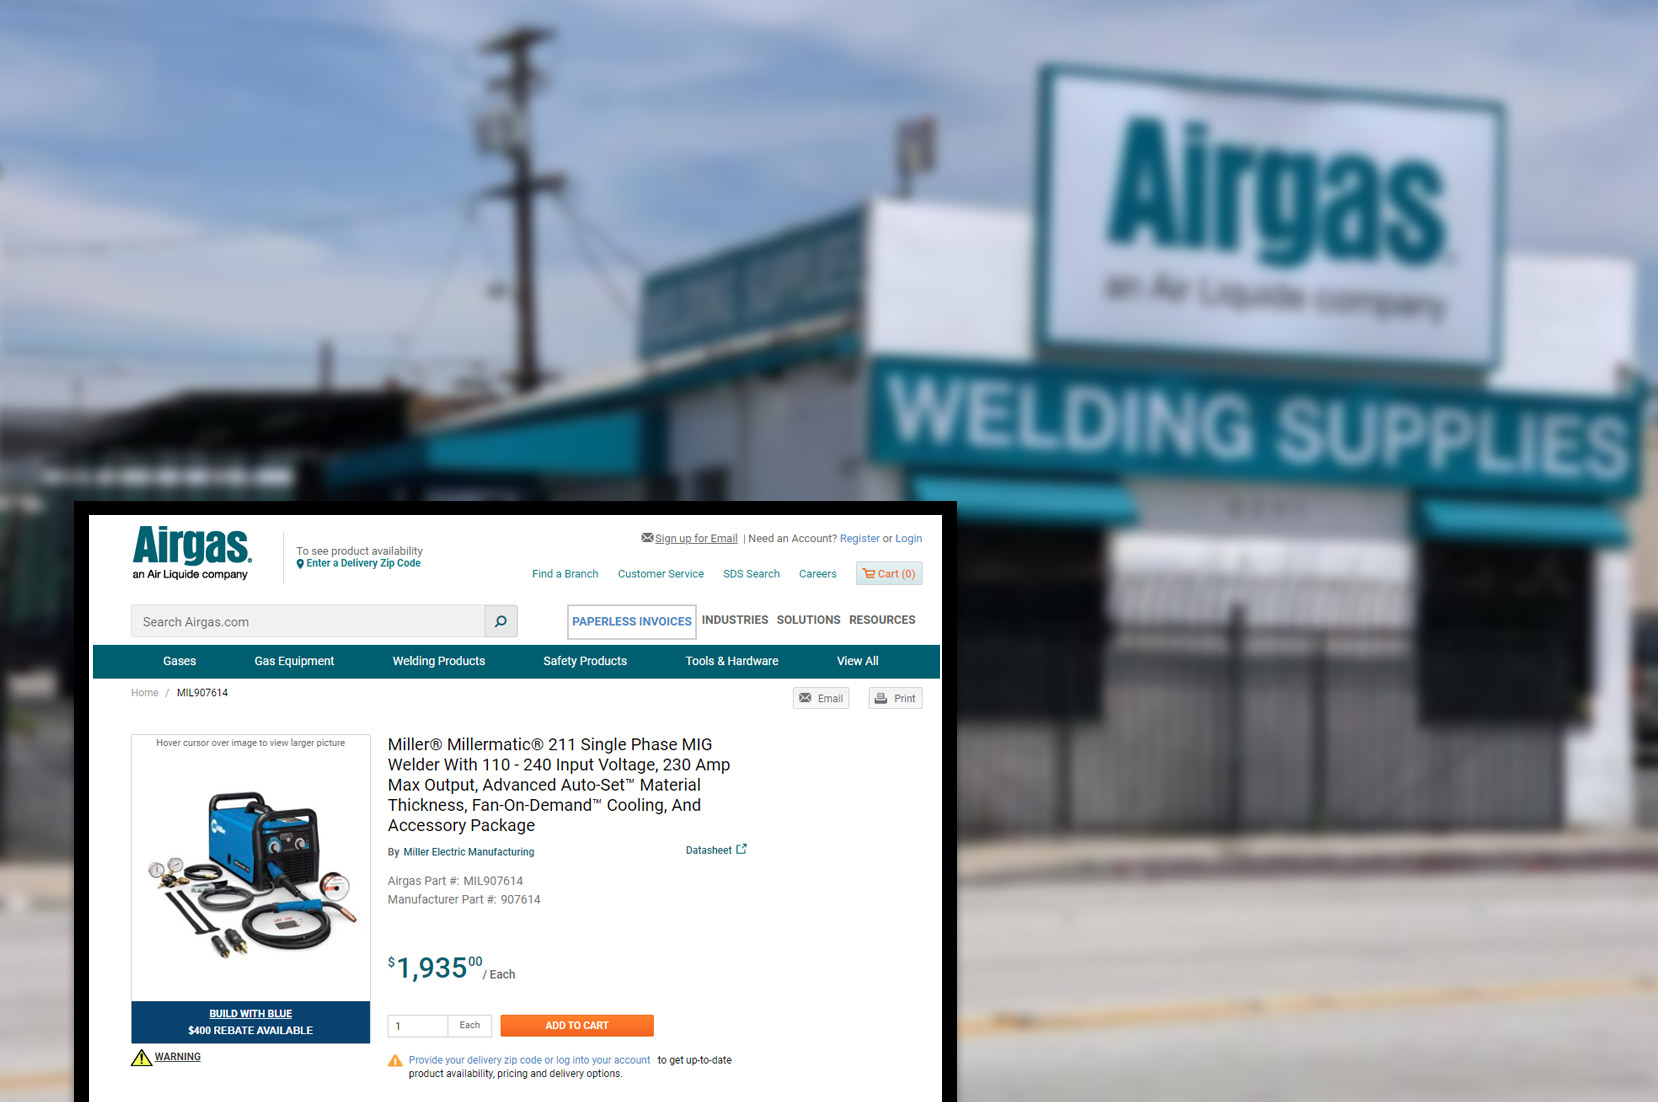 airgas-comproduct-pricing-information-and-image-scraping-services